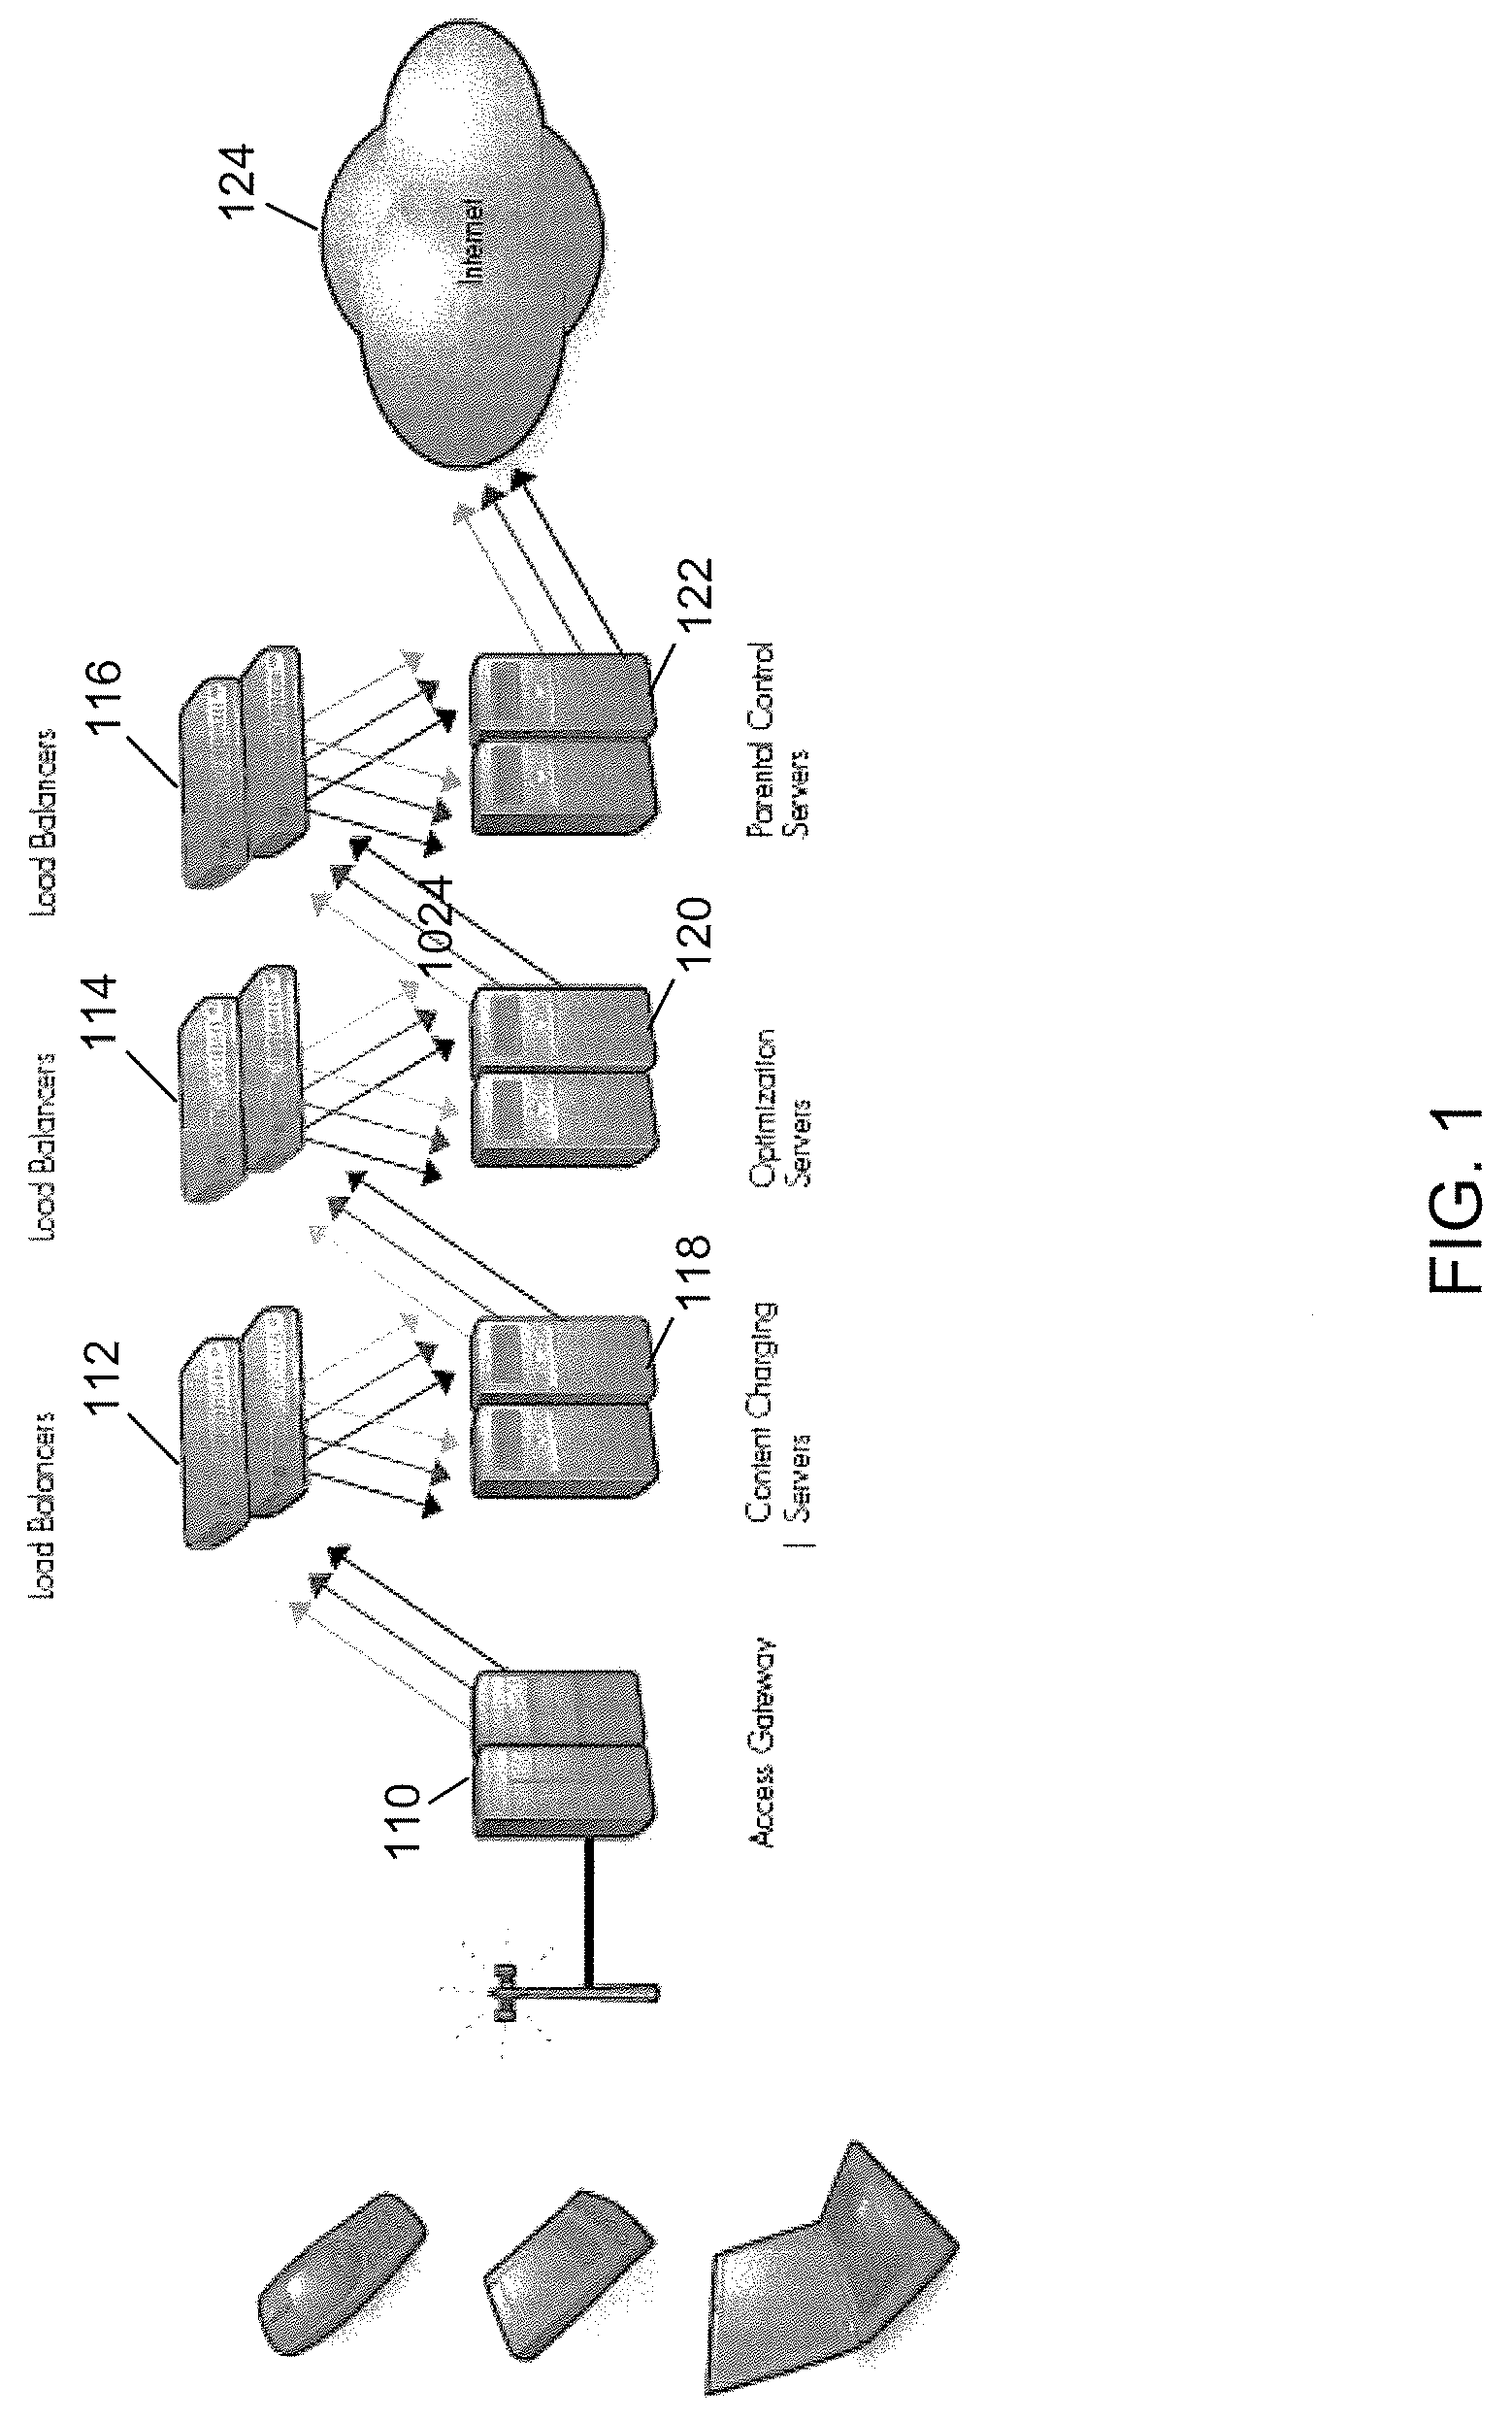 Providing services to packet flows in a network